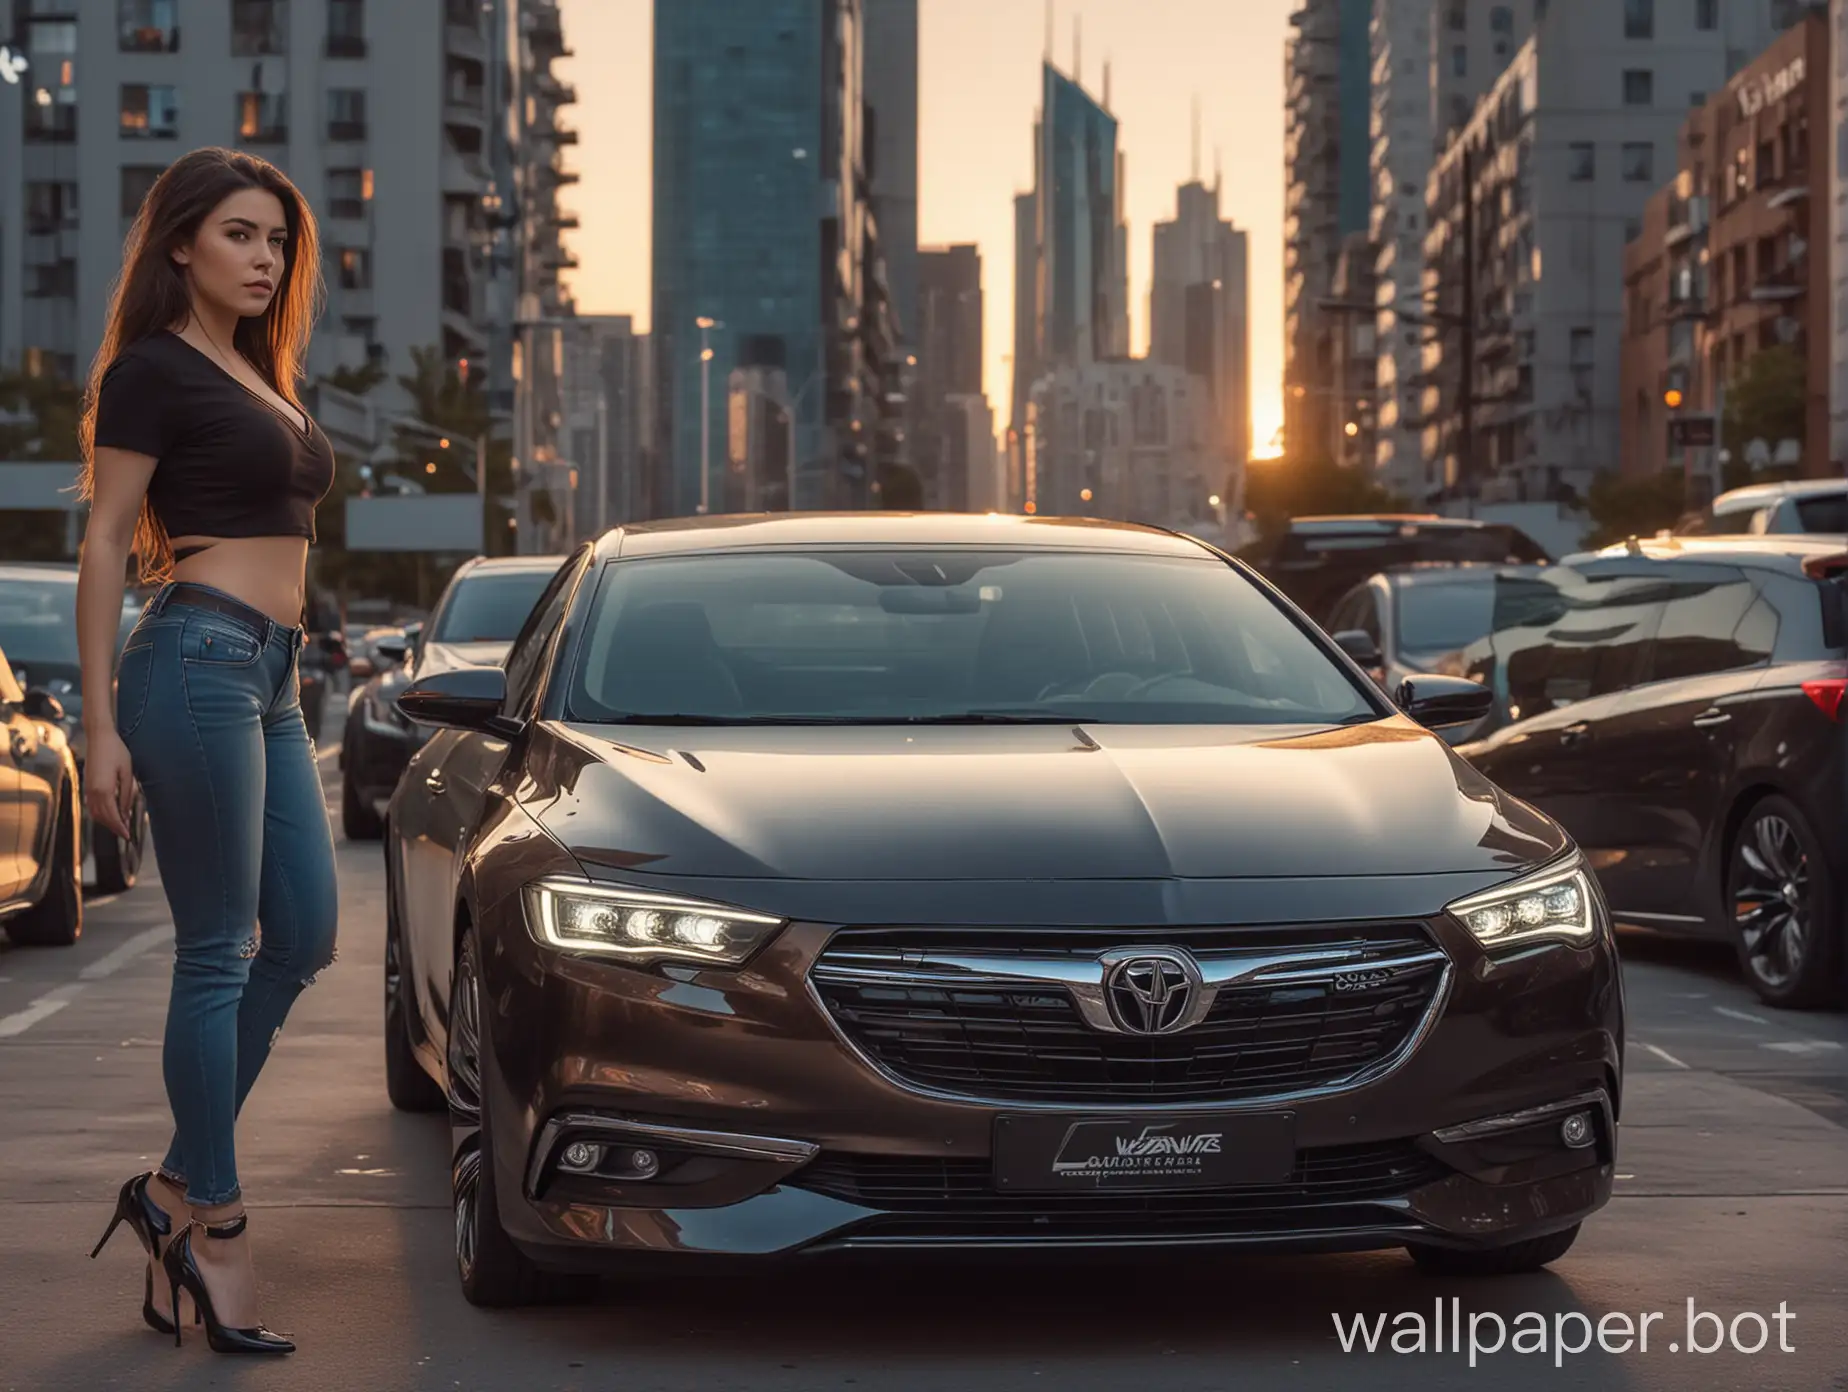 One fuller, curvy shaped woman visible from the back. She has long darkbrown hair (her face isn't visible), wearing black t-shirt with cleavage, jeans and high heels standing near of grey Opel insignia grandsport. The car is visible from the front and is standing next to the woman. The background is a futuristic city at sunset, synthwave style